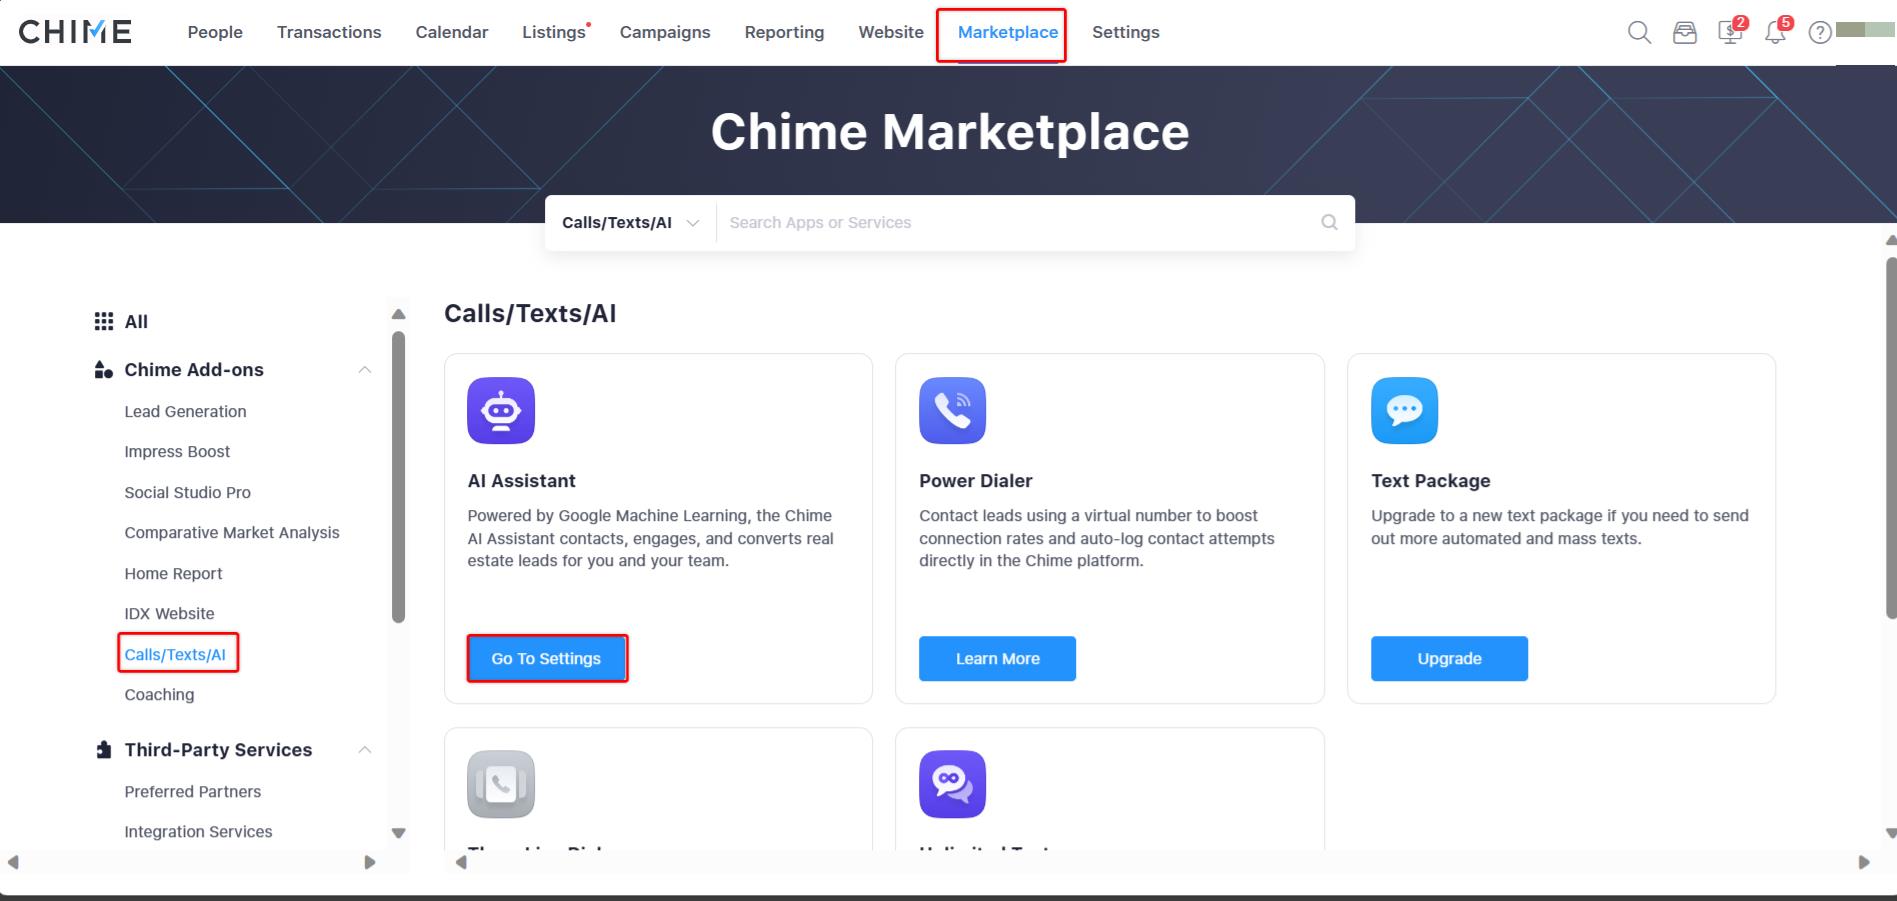 Eric _ Odessa _ Microsoft Teams & Marketplace _ Chime and 3 more pages - [InPrivate] - Microsoft_ Edge 2023-09-22 at 3.25.40 AM.jpeg